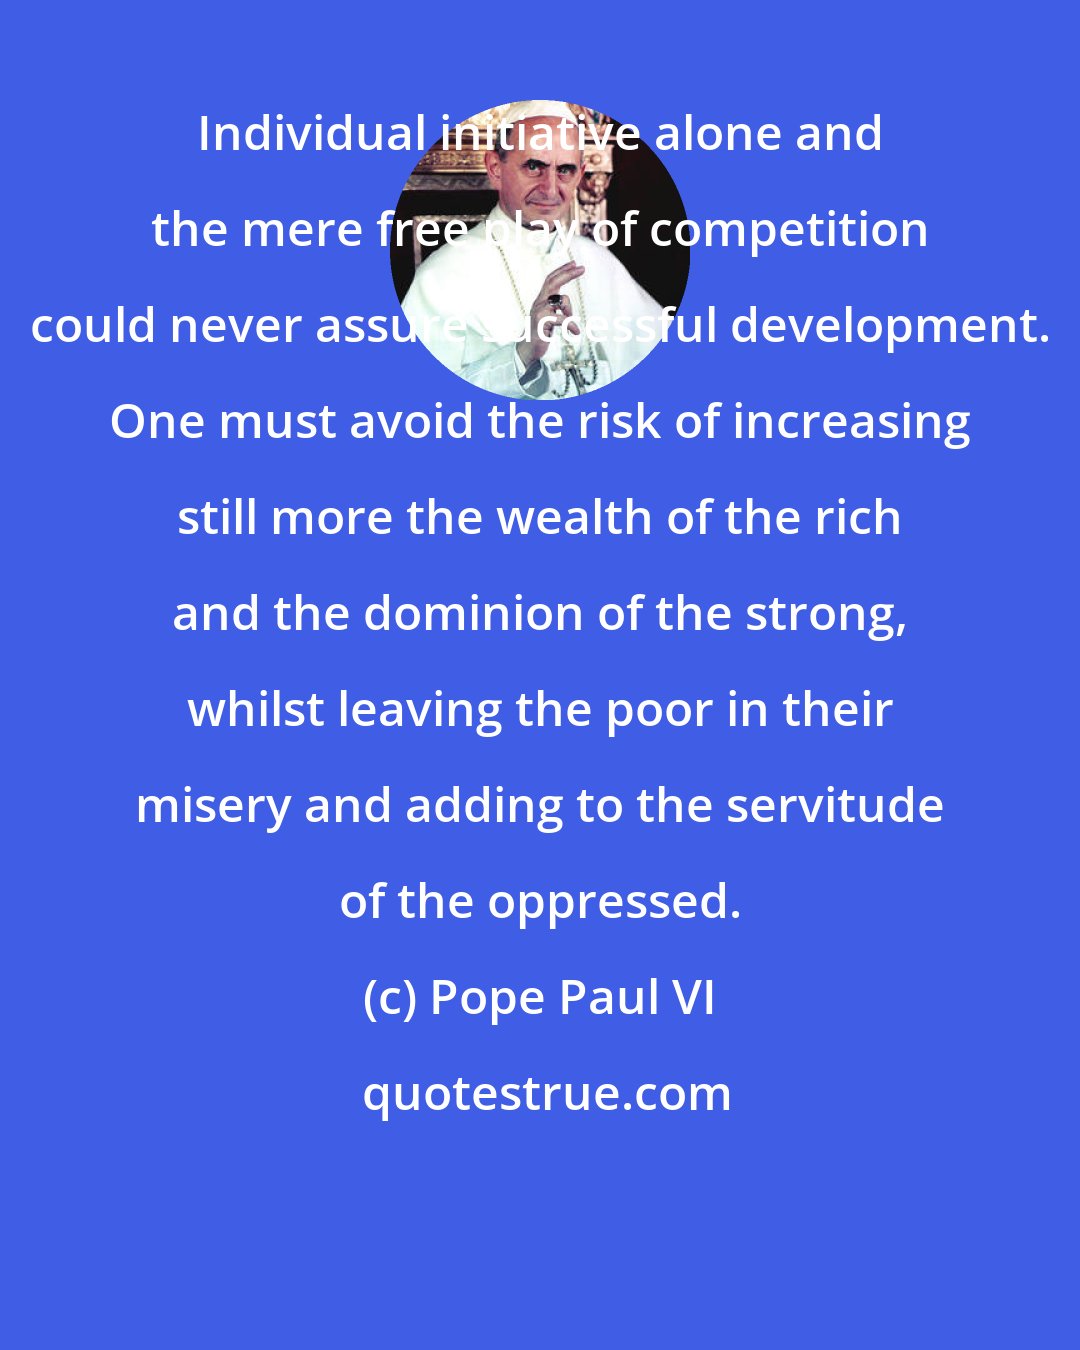 Pope Paul VI: Individual initiative alone and the mere free play of competition could never assure successful development. One must avoid the risk of increasing still more the wealth of the rich and the dominion of the strong, whilst leaving the poor in their misery and adding to the servitude of the oppressed.